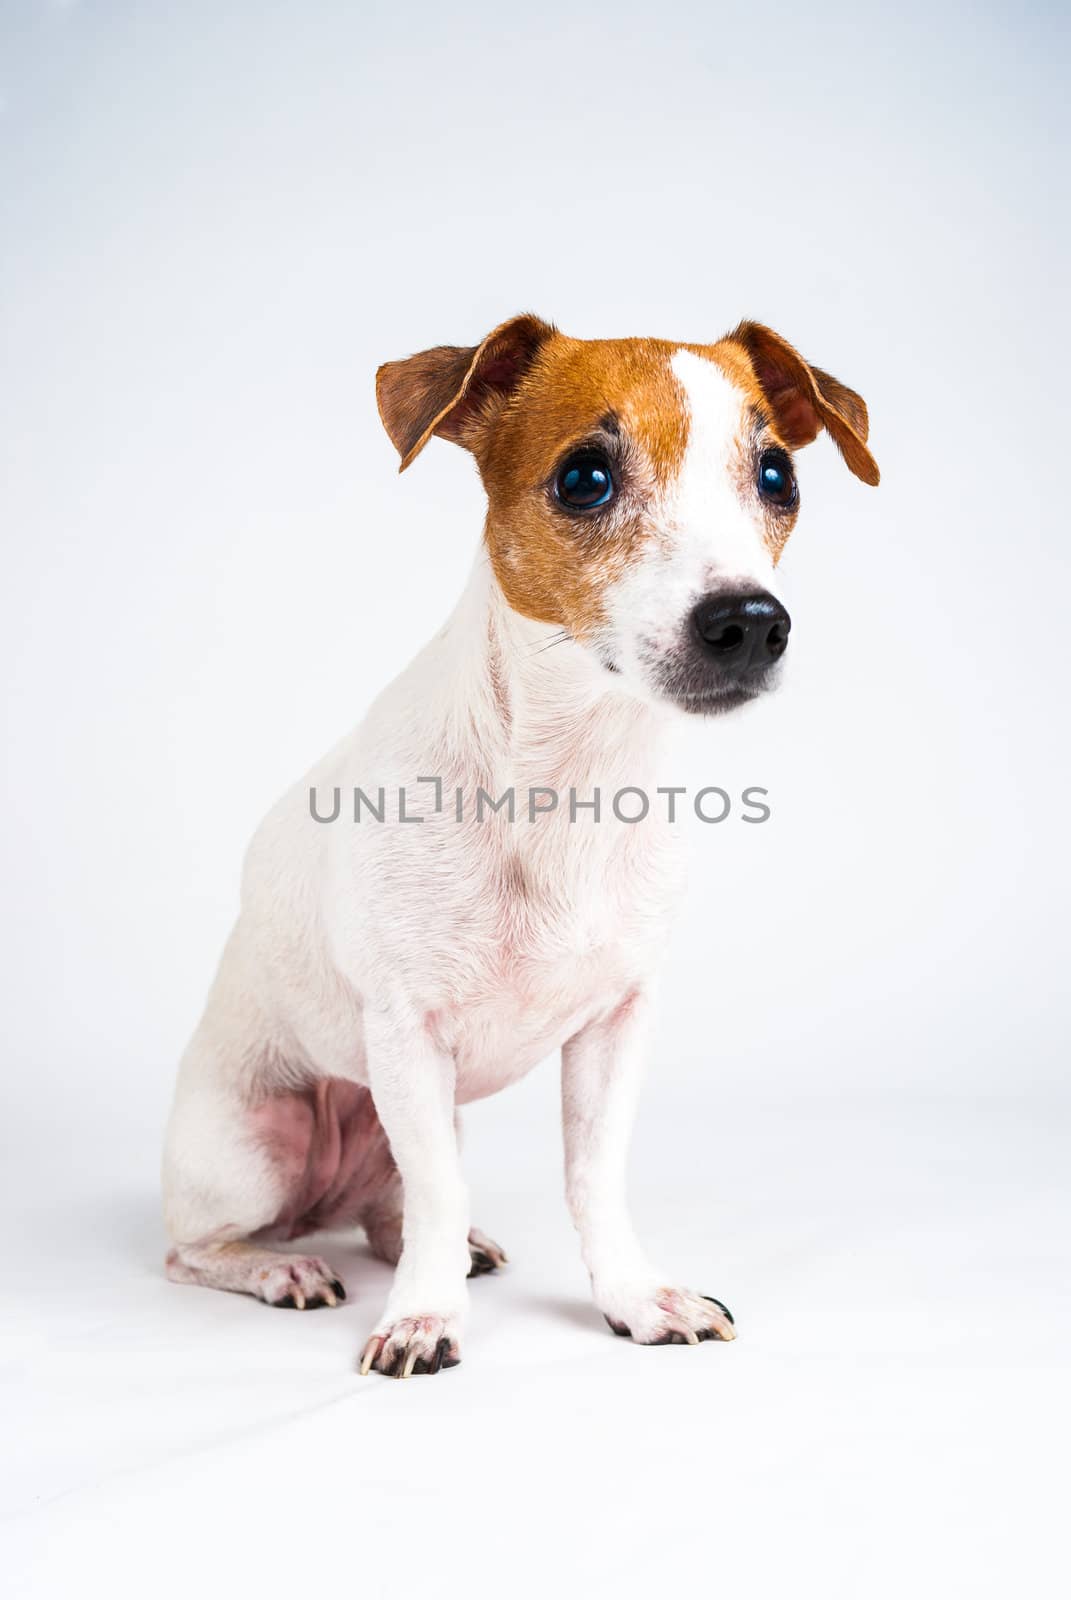 Obedient Jack Russell Terrier by oliverjw